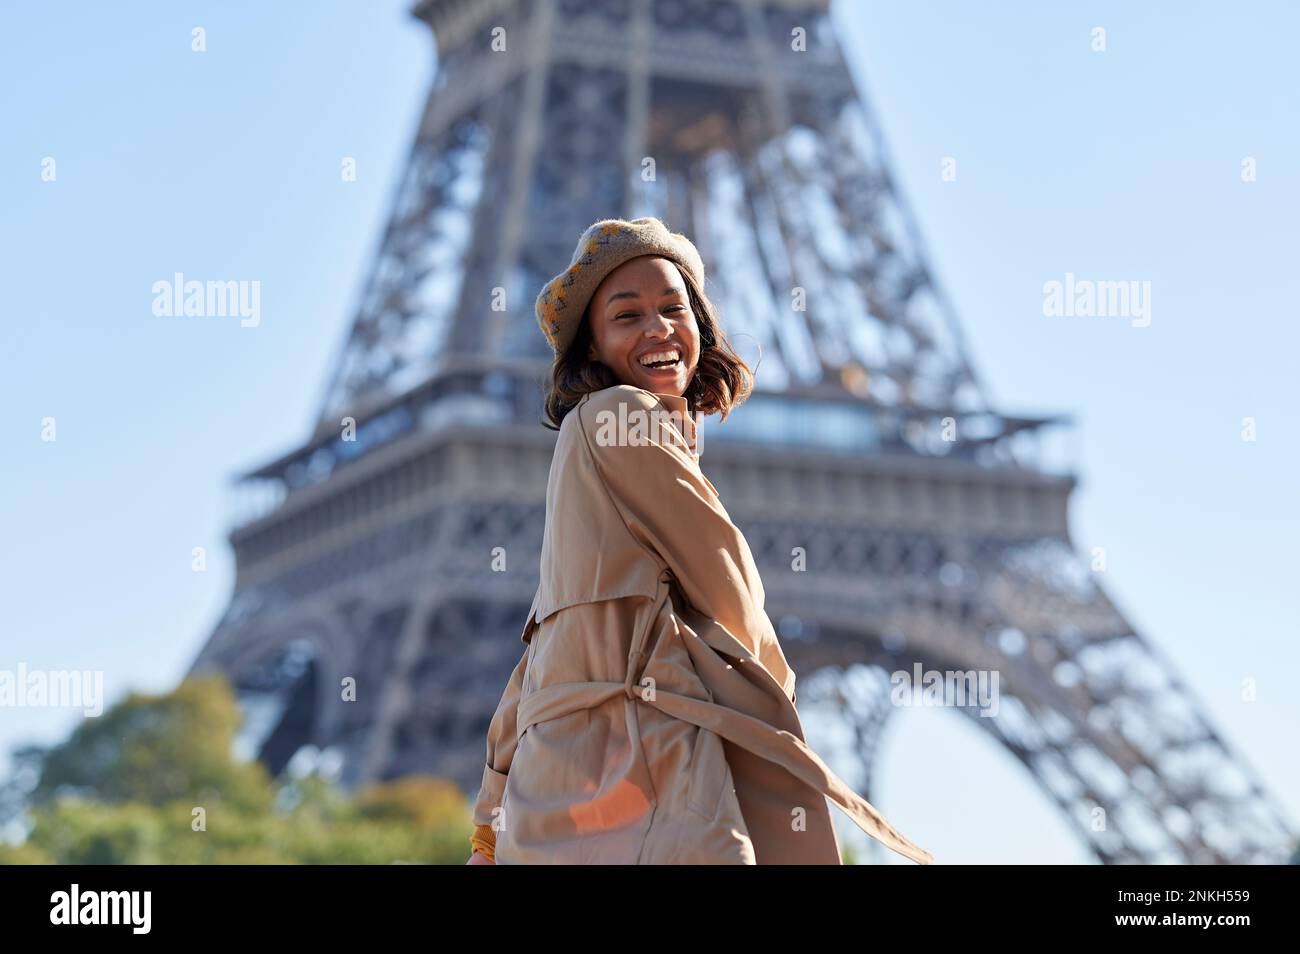 Happy young woman enjoying in front of Eiffel tower, Paris, France Stock Photo